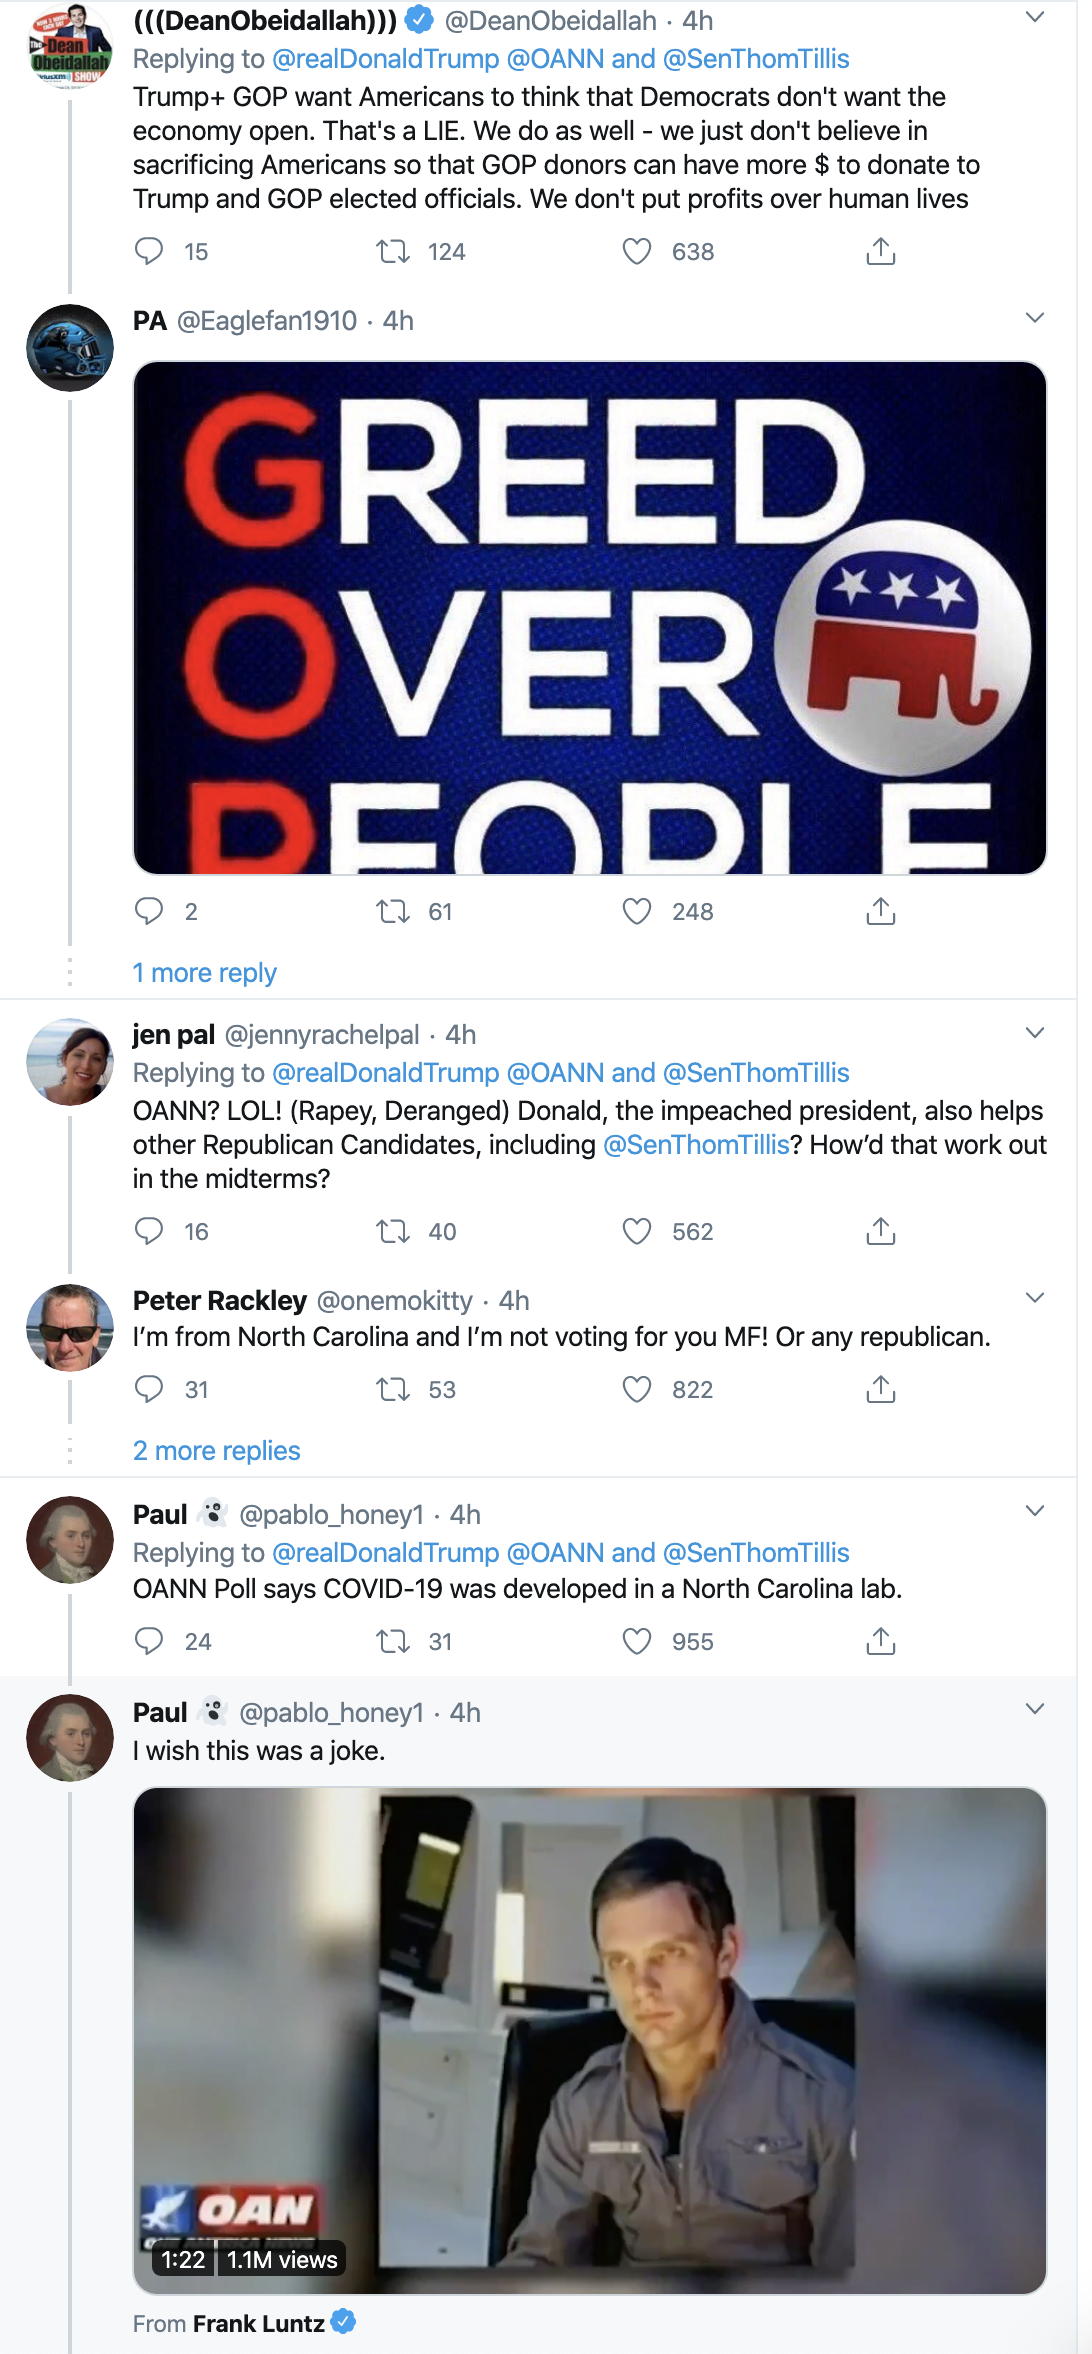 Screen-Shot-2020-04-16-at-12.53.51-PM Trump Delivers Ridiculous Thursday Twitter Tantrum Election 2020 Featured Healthcare Politics Top Stories 